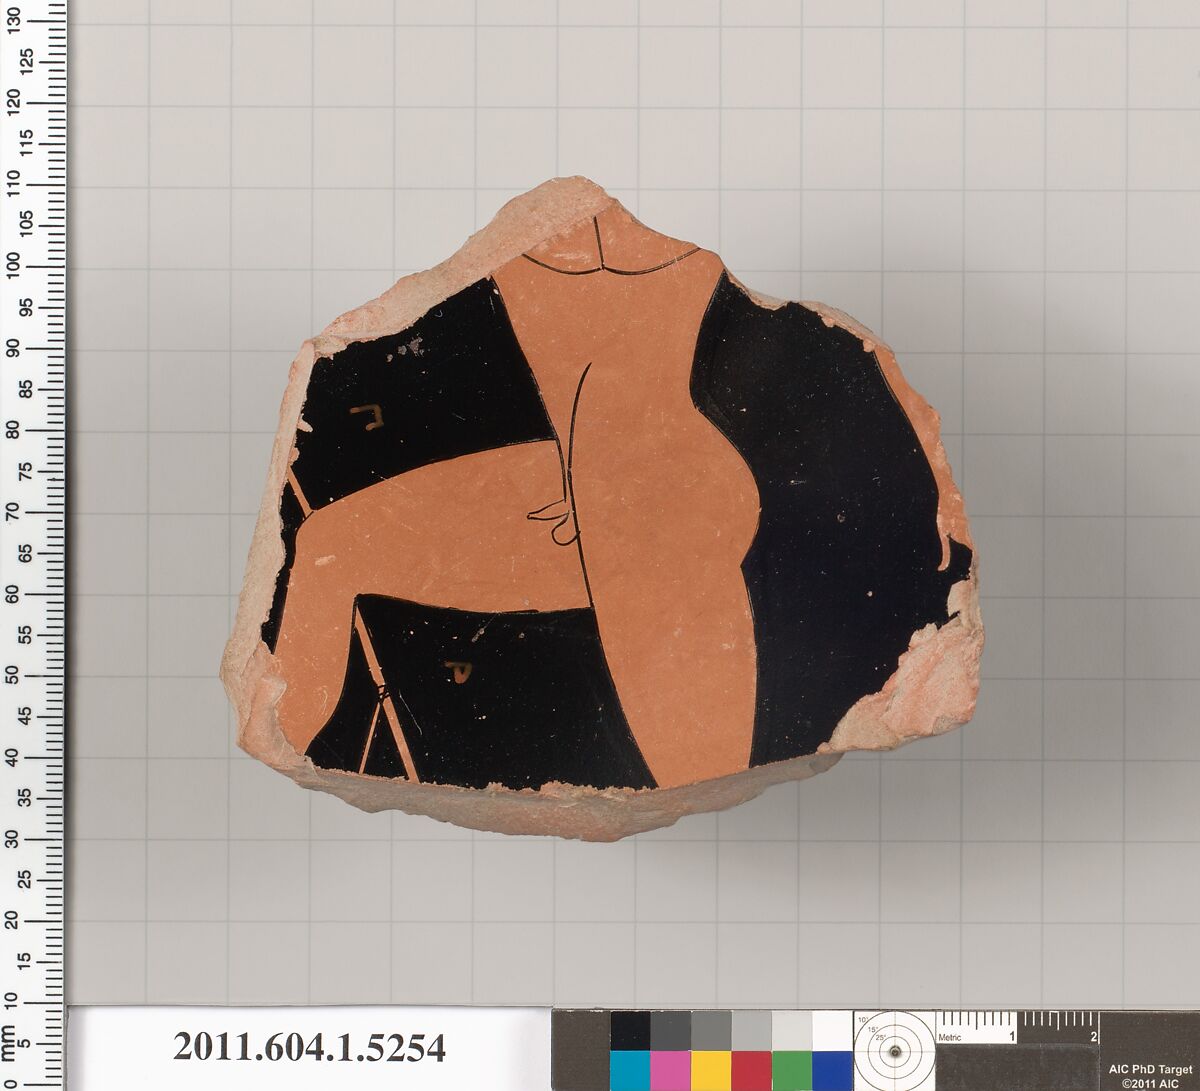 Terracotta fragment of a kylix (drinking cup), Attributed to the Poseidon Painter [DvB], Terracotta, Greek, Attic 